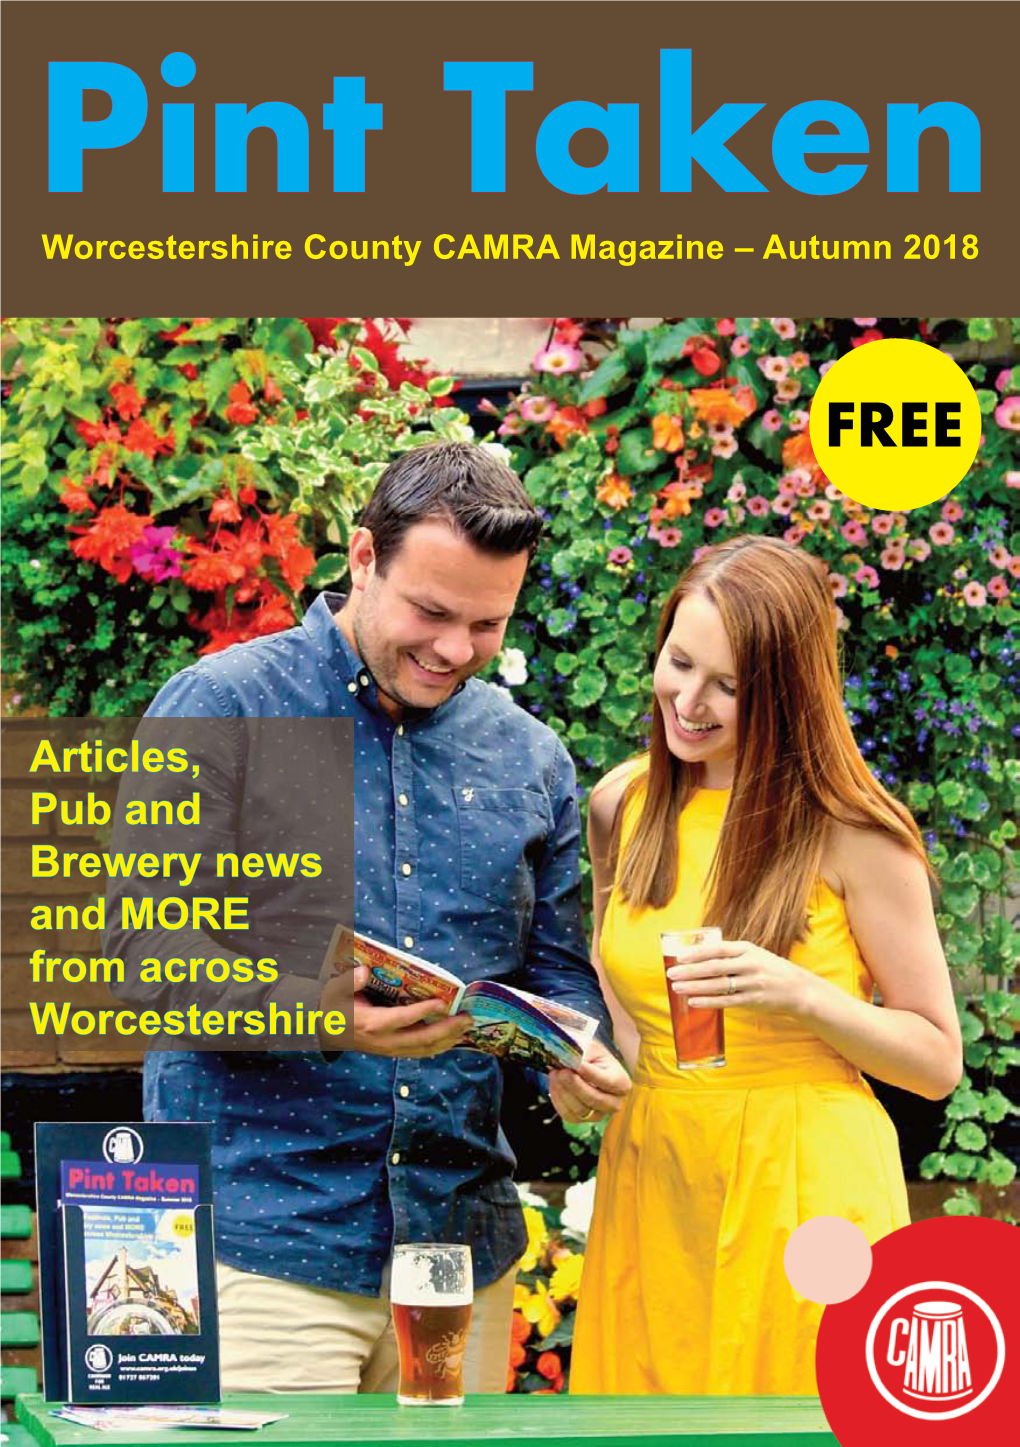 Articles, Pub and Brewery News and MORE from Across Worcestershire